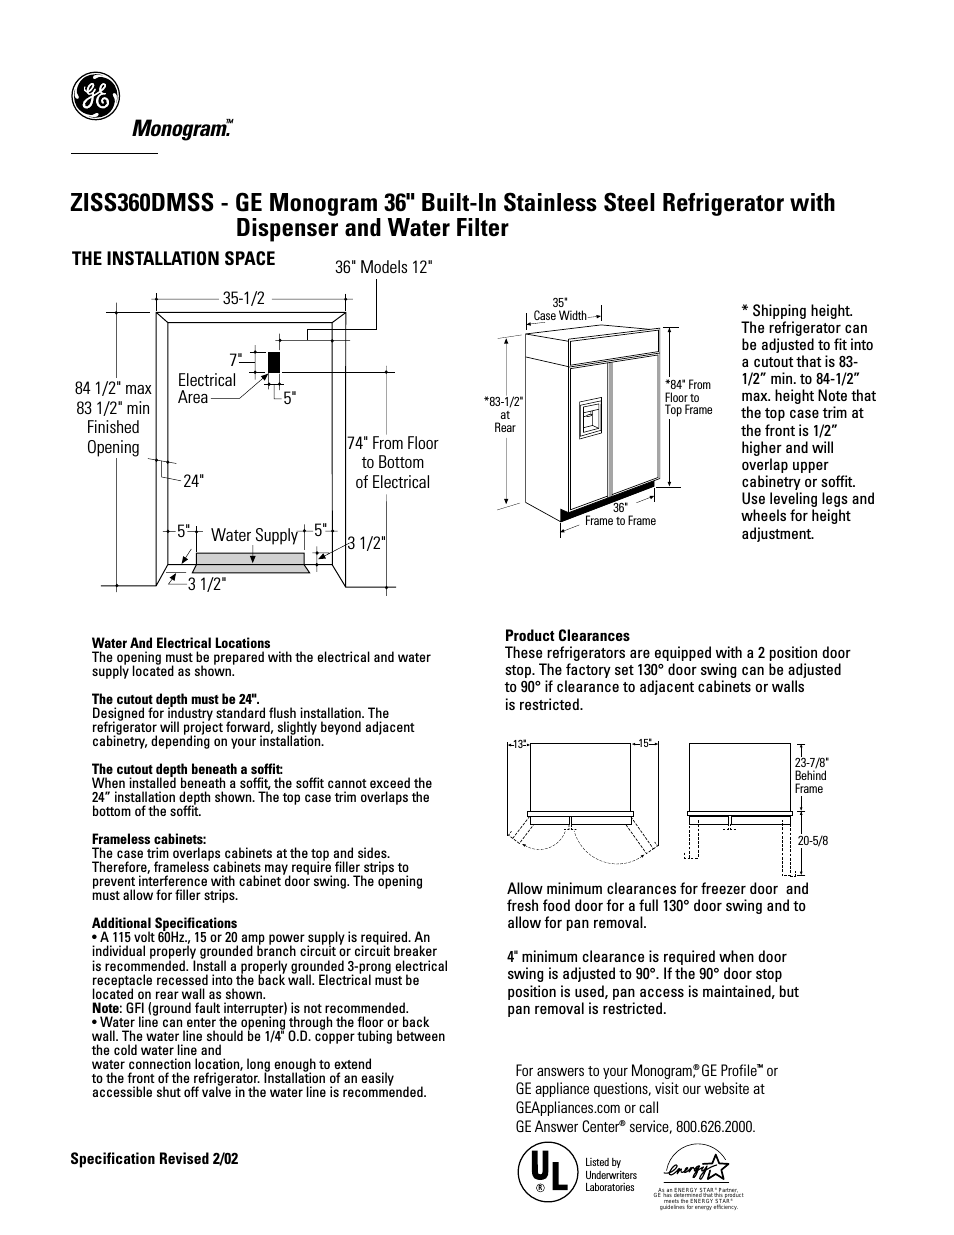 ZISS360DMSS (Page 1)